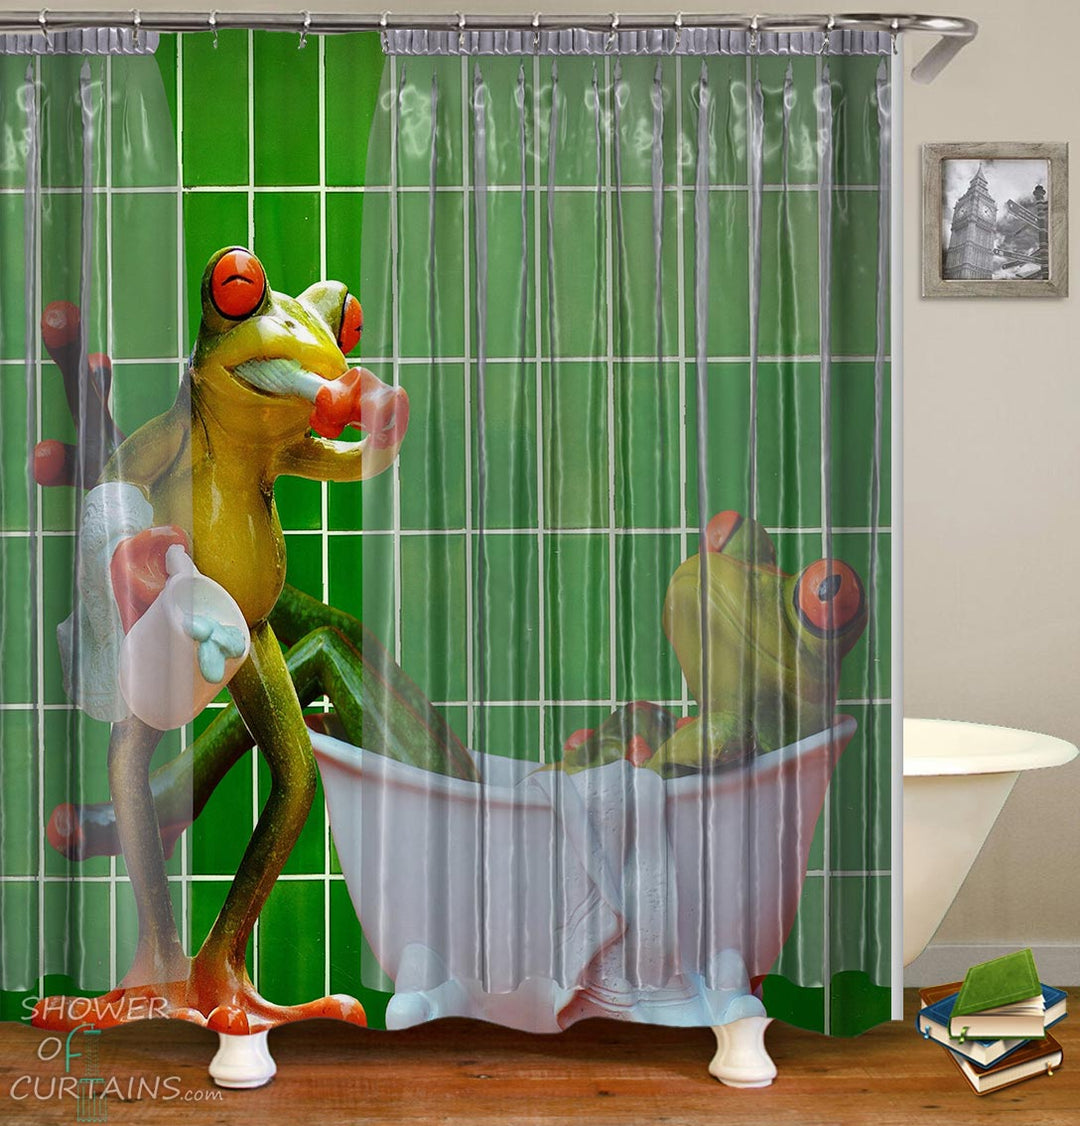 Funny Shower Curtain